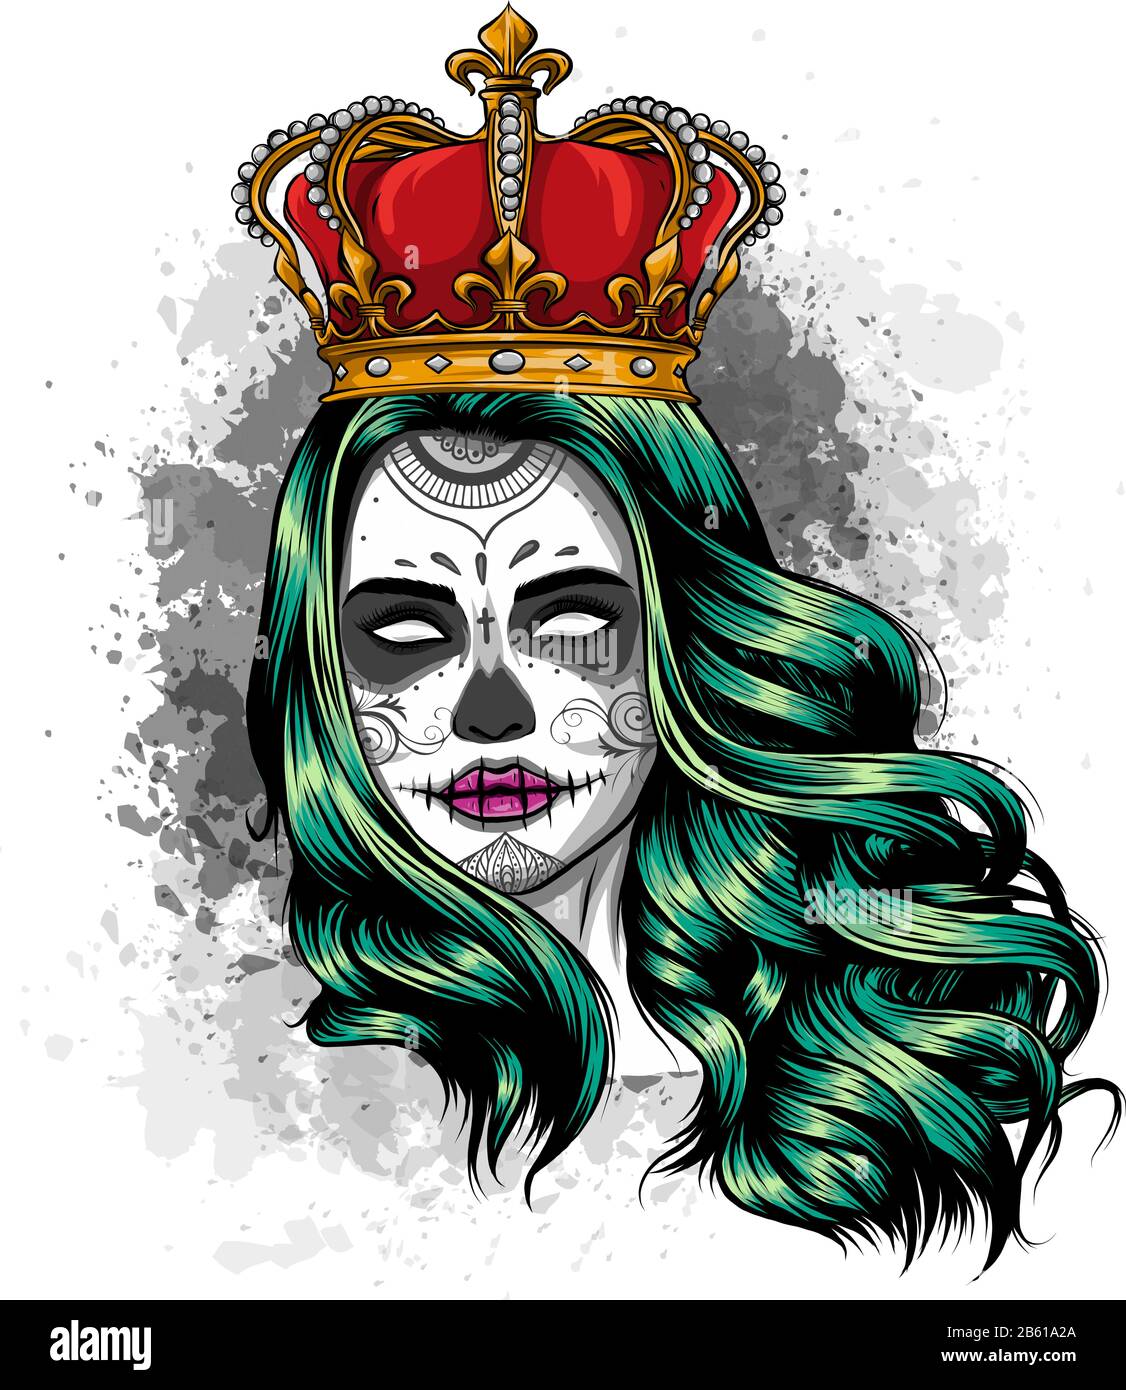 Skull girl with a crown. Vector illustration design Stock Vector